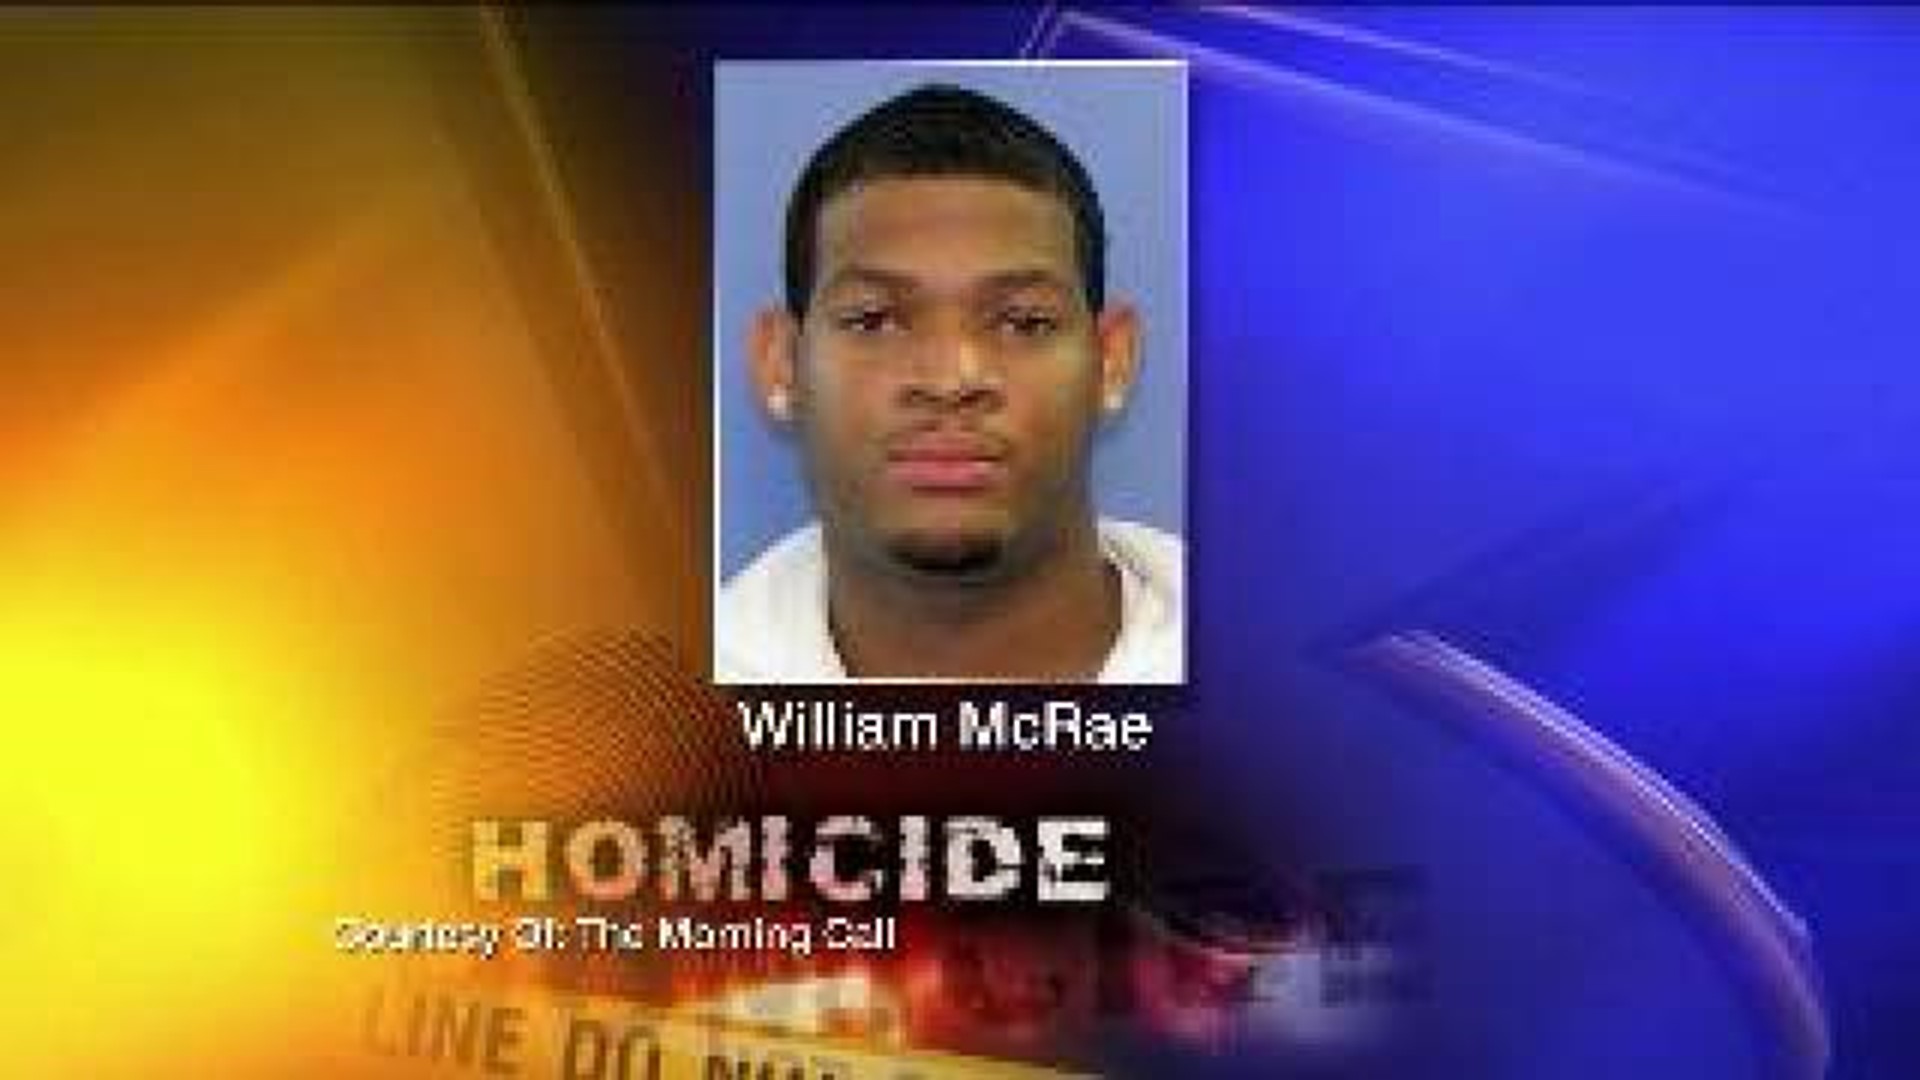 Man Accused of Homicide, Beating, and Robbery